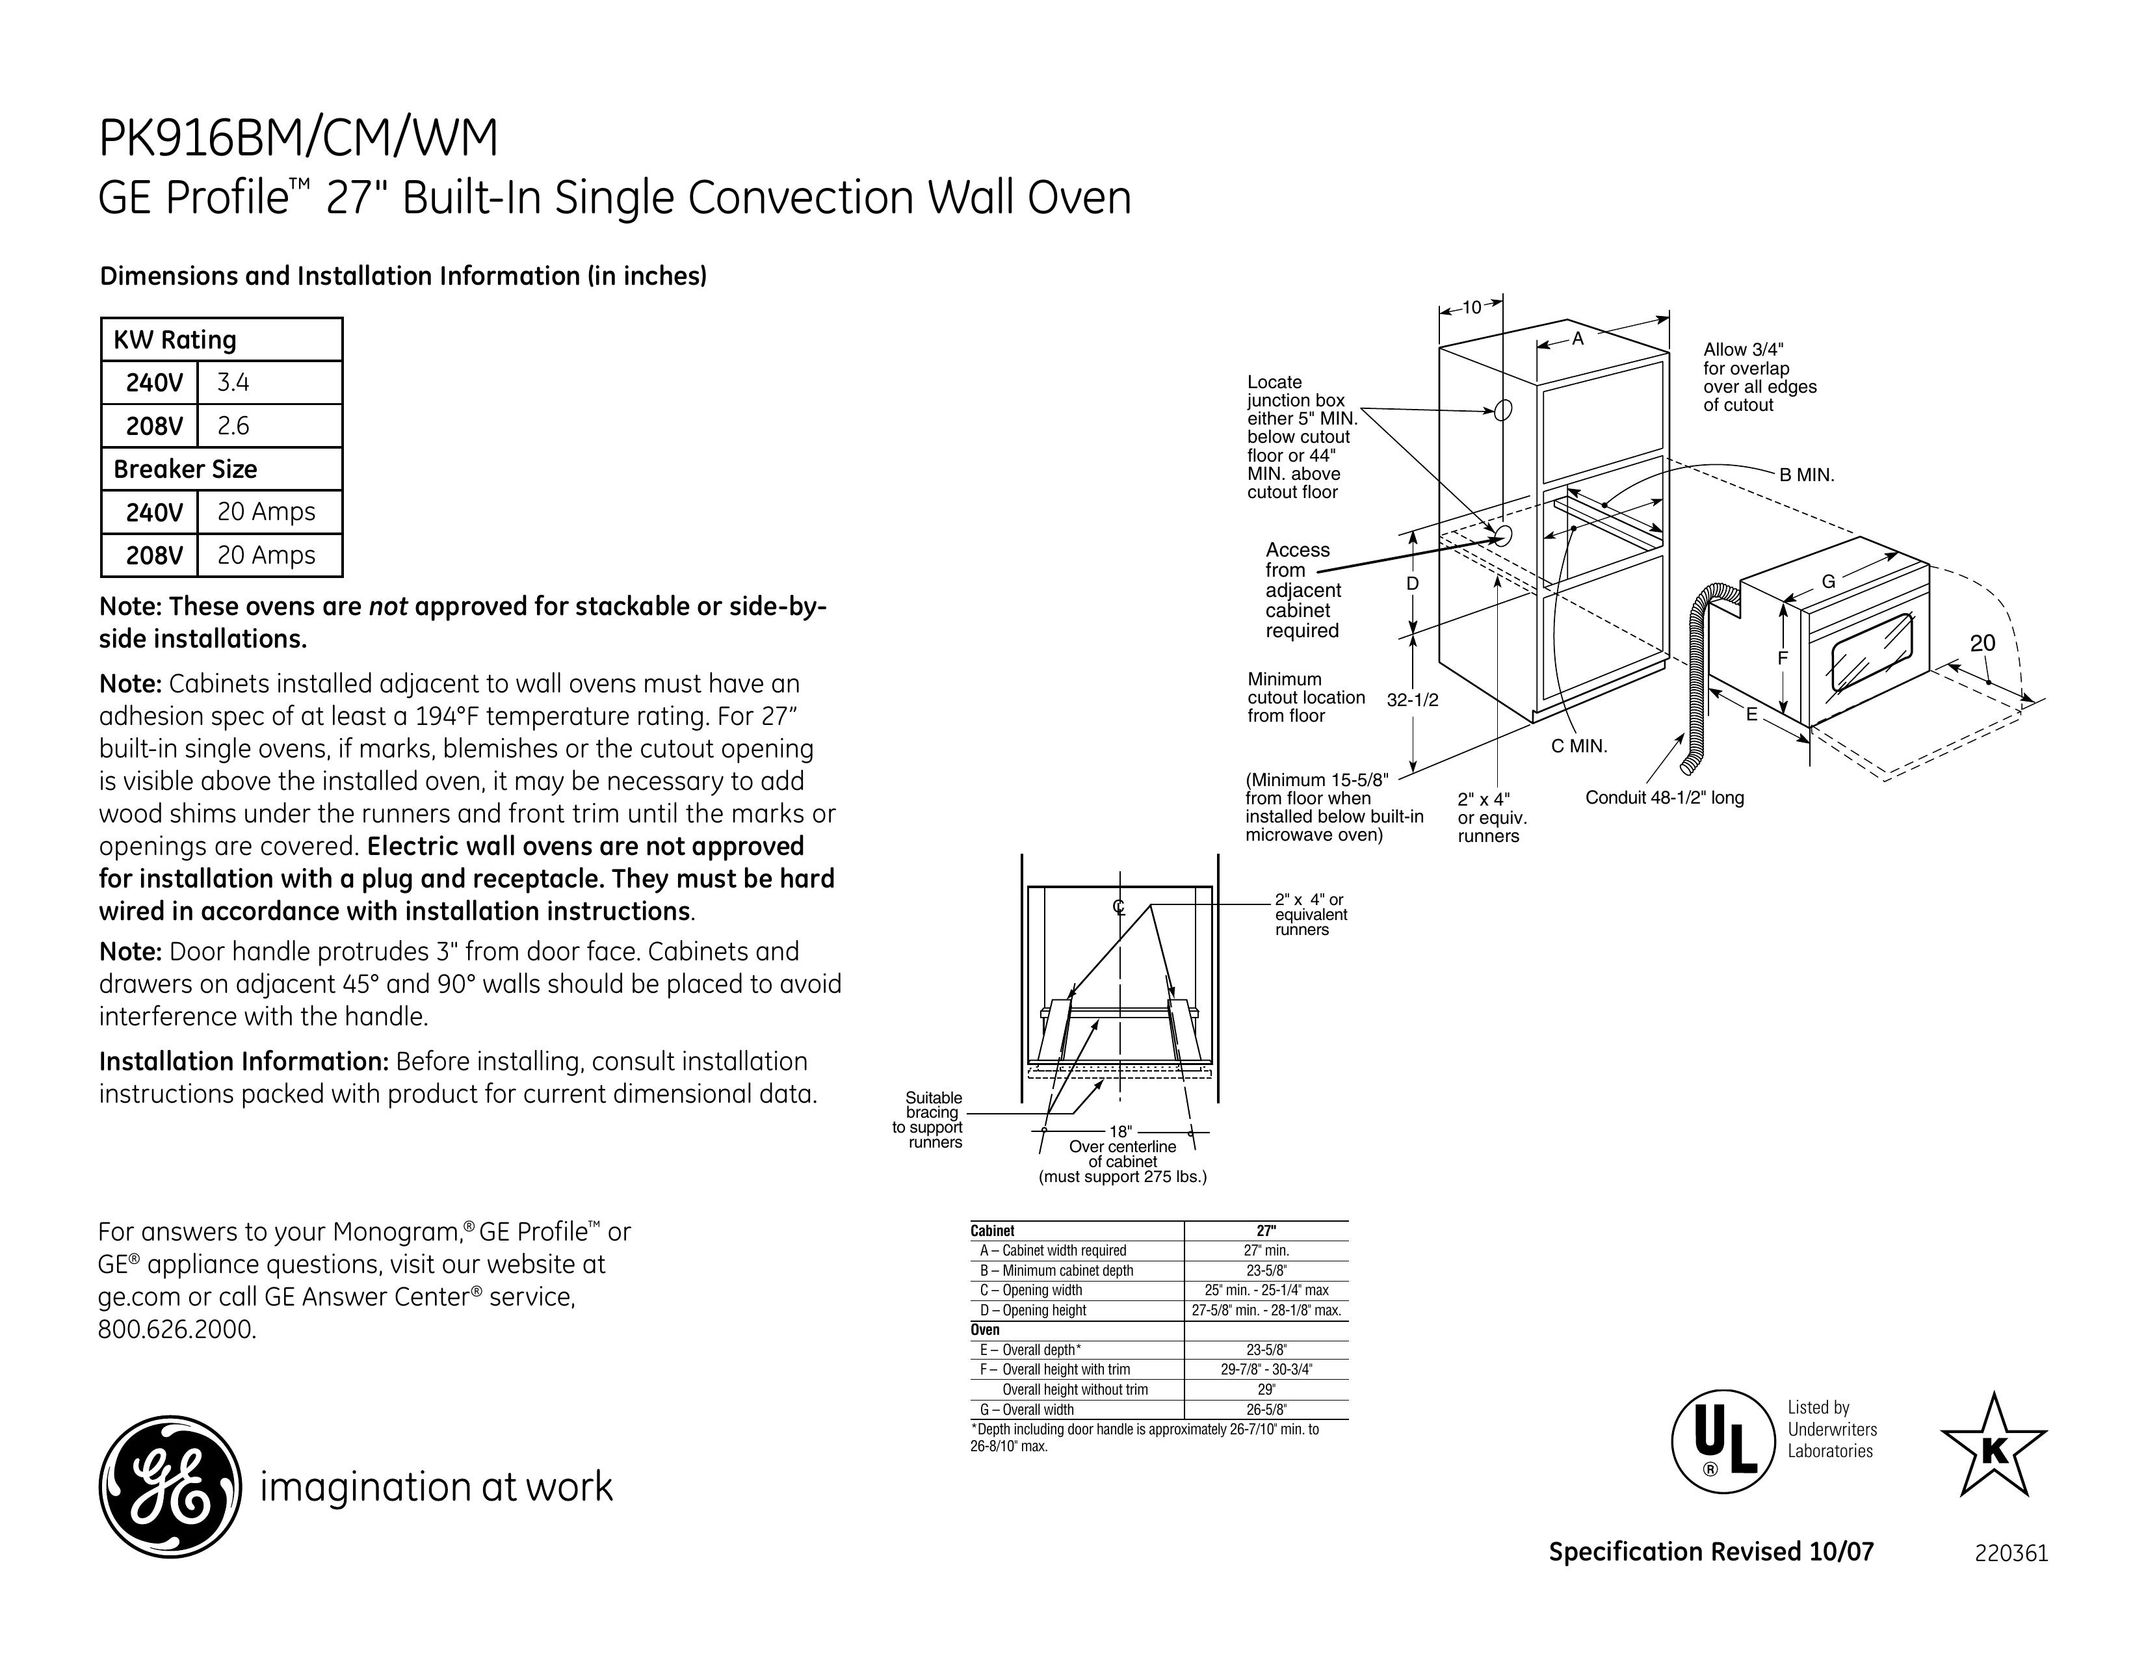 GE PK916BM Convection Oven User Manual